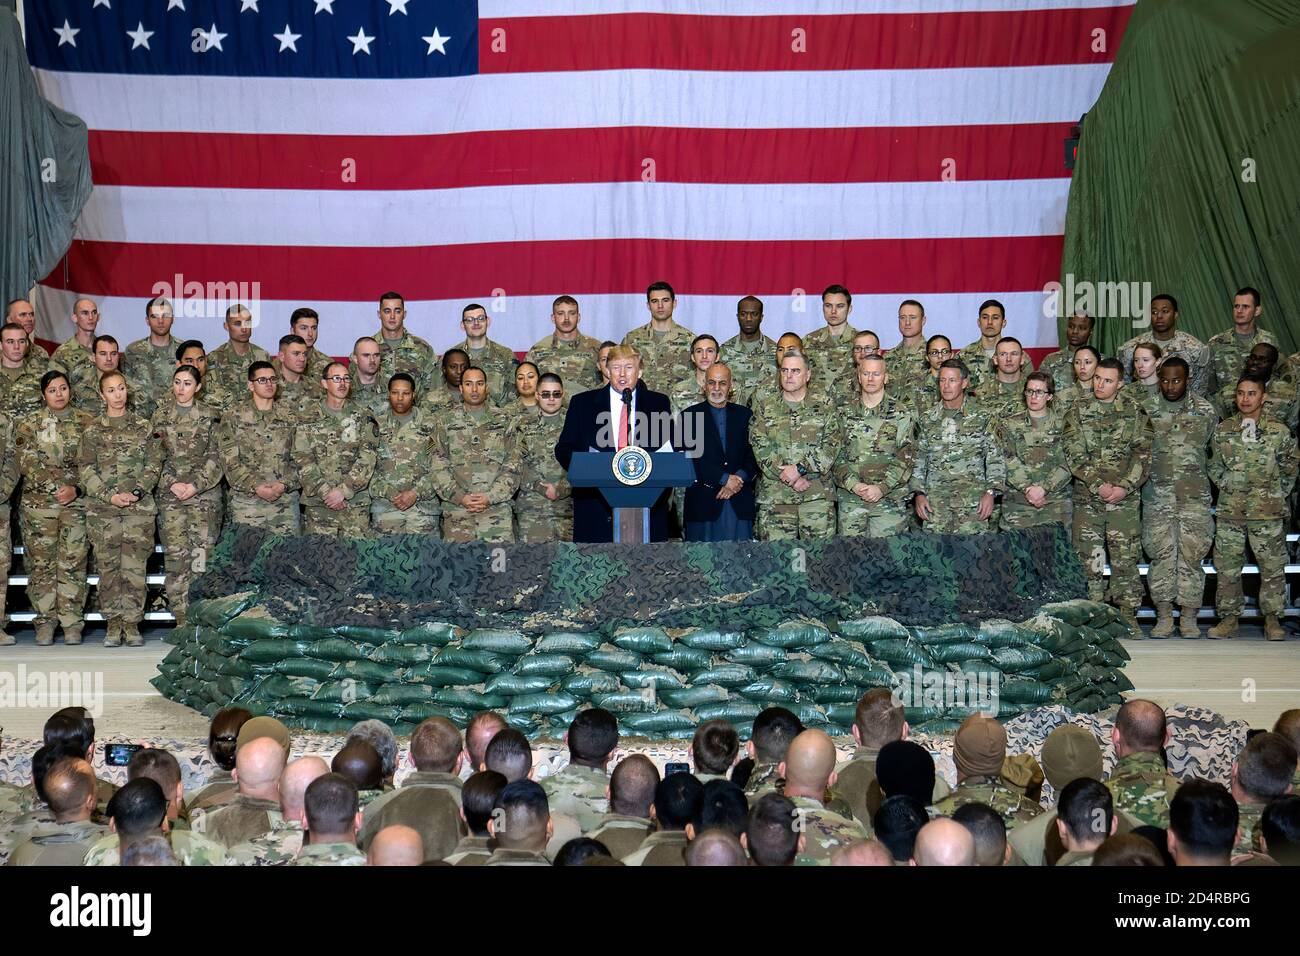 President of the United States Donald J. Trump and Army Gen. Mark A. Milley, chairman of the Joint Chiefs of Staff, meet with service members at Bagram Airfield in Afghanistan, Nov. 28, 2019. (DOD photo by U.S. Navy Petty Officer 1st Class Dominique A. Pineiro) Stock Photo